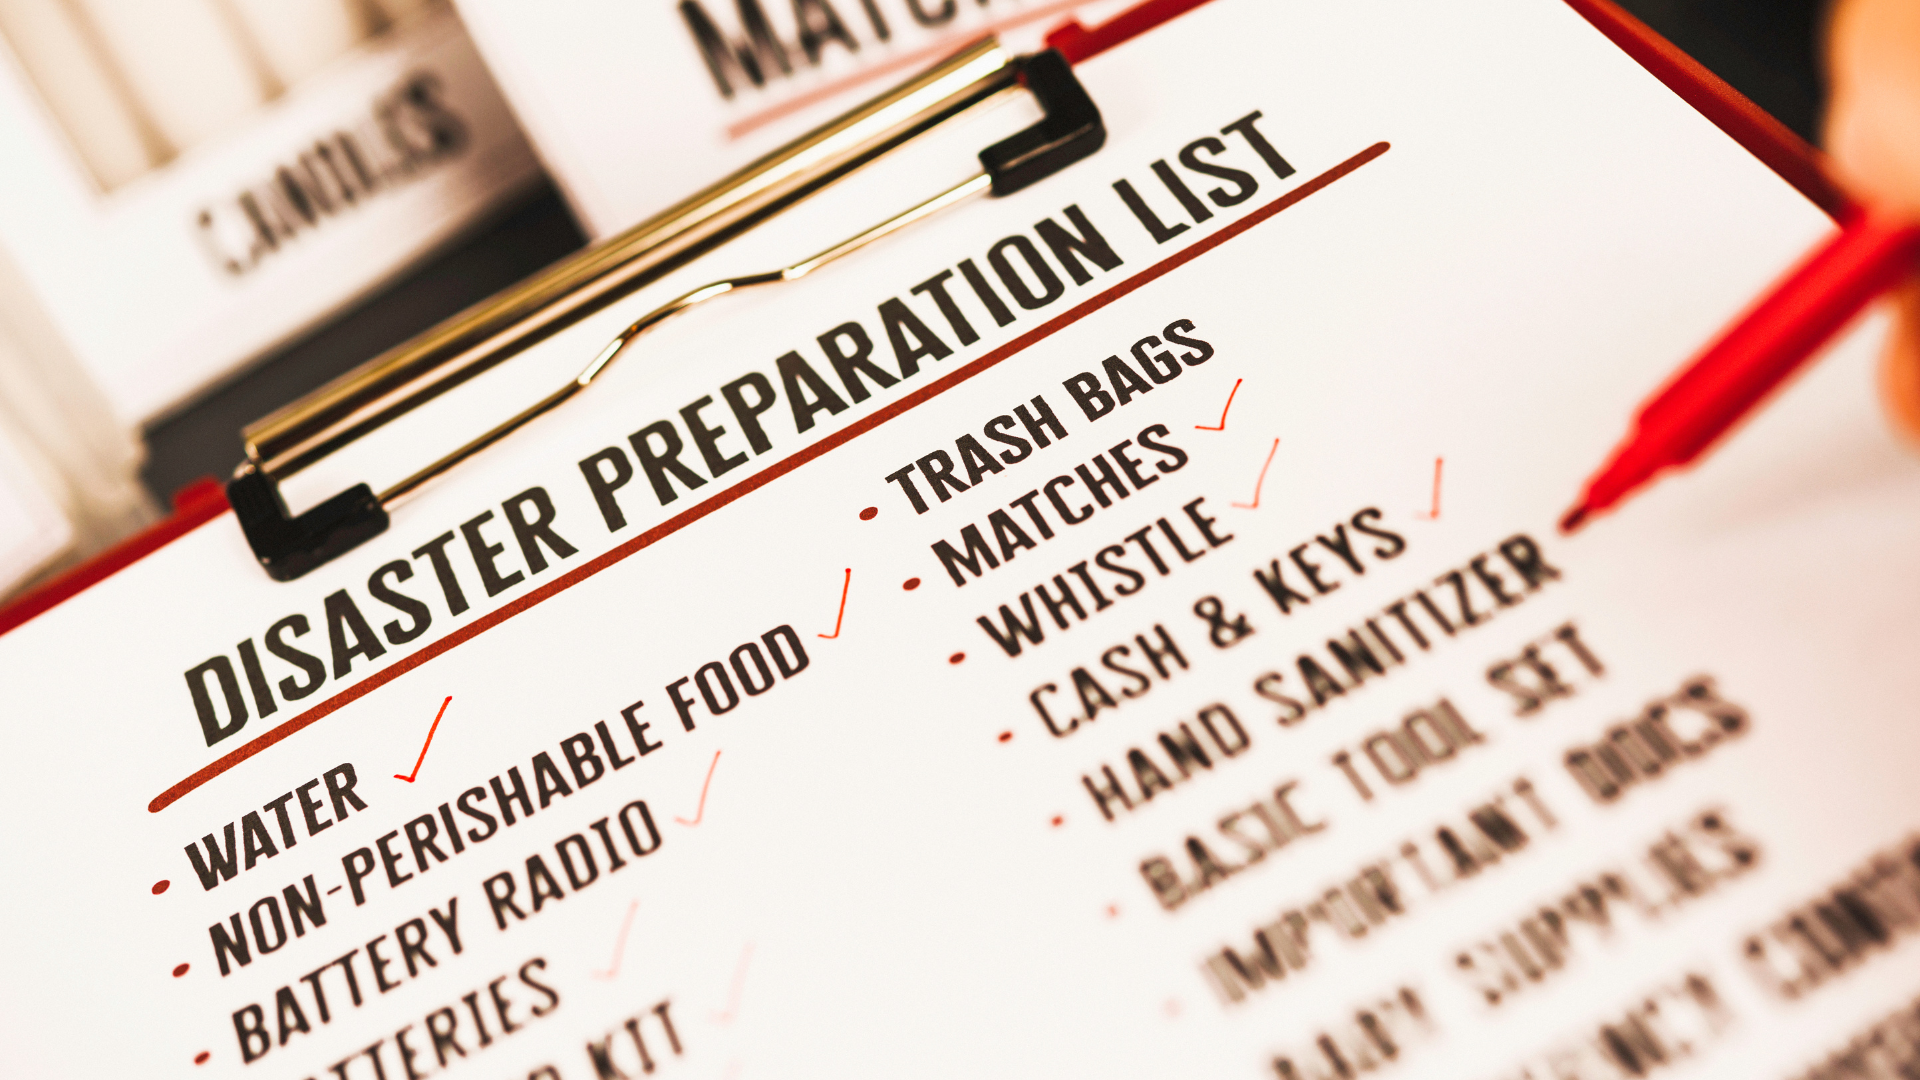 Evacuation Planning and Preparation for Disasters